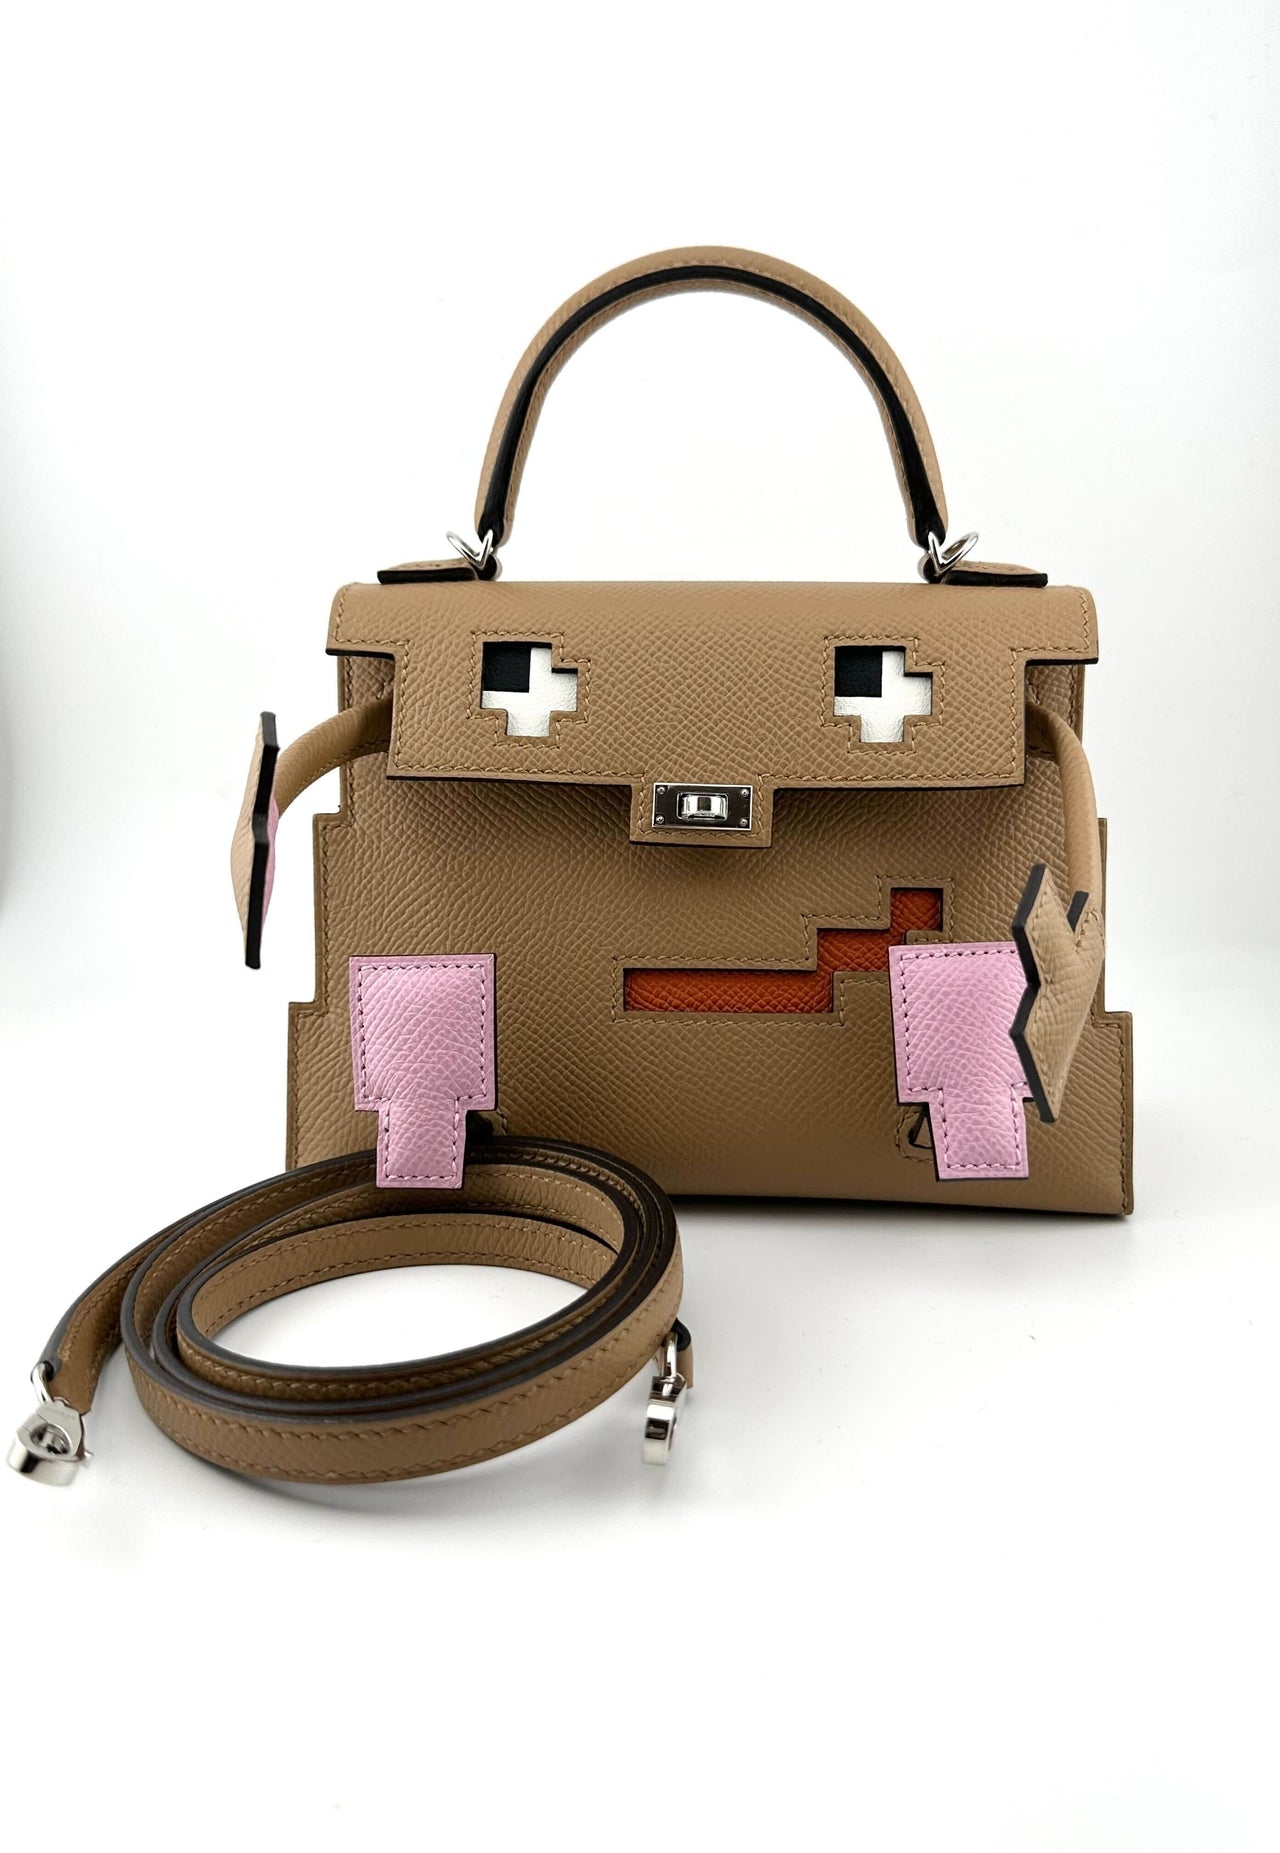 LIMITED EDITION Hermes Kelly Doll Quelle Idole Picto in Epsom Mauve Sylvestre, Nata, Lime, and Chai Palladium Hardware